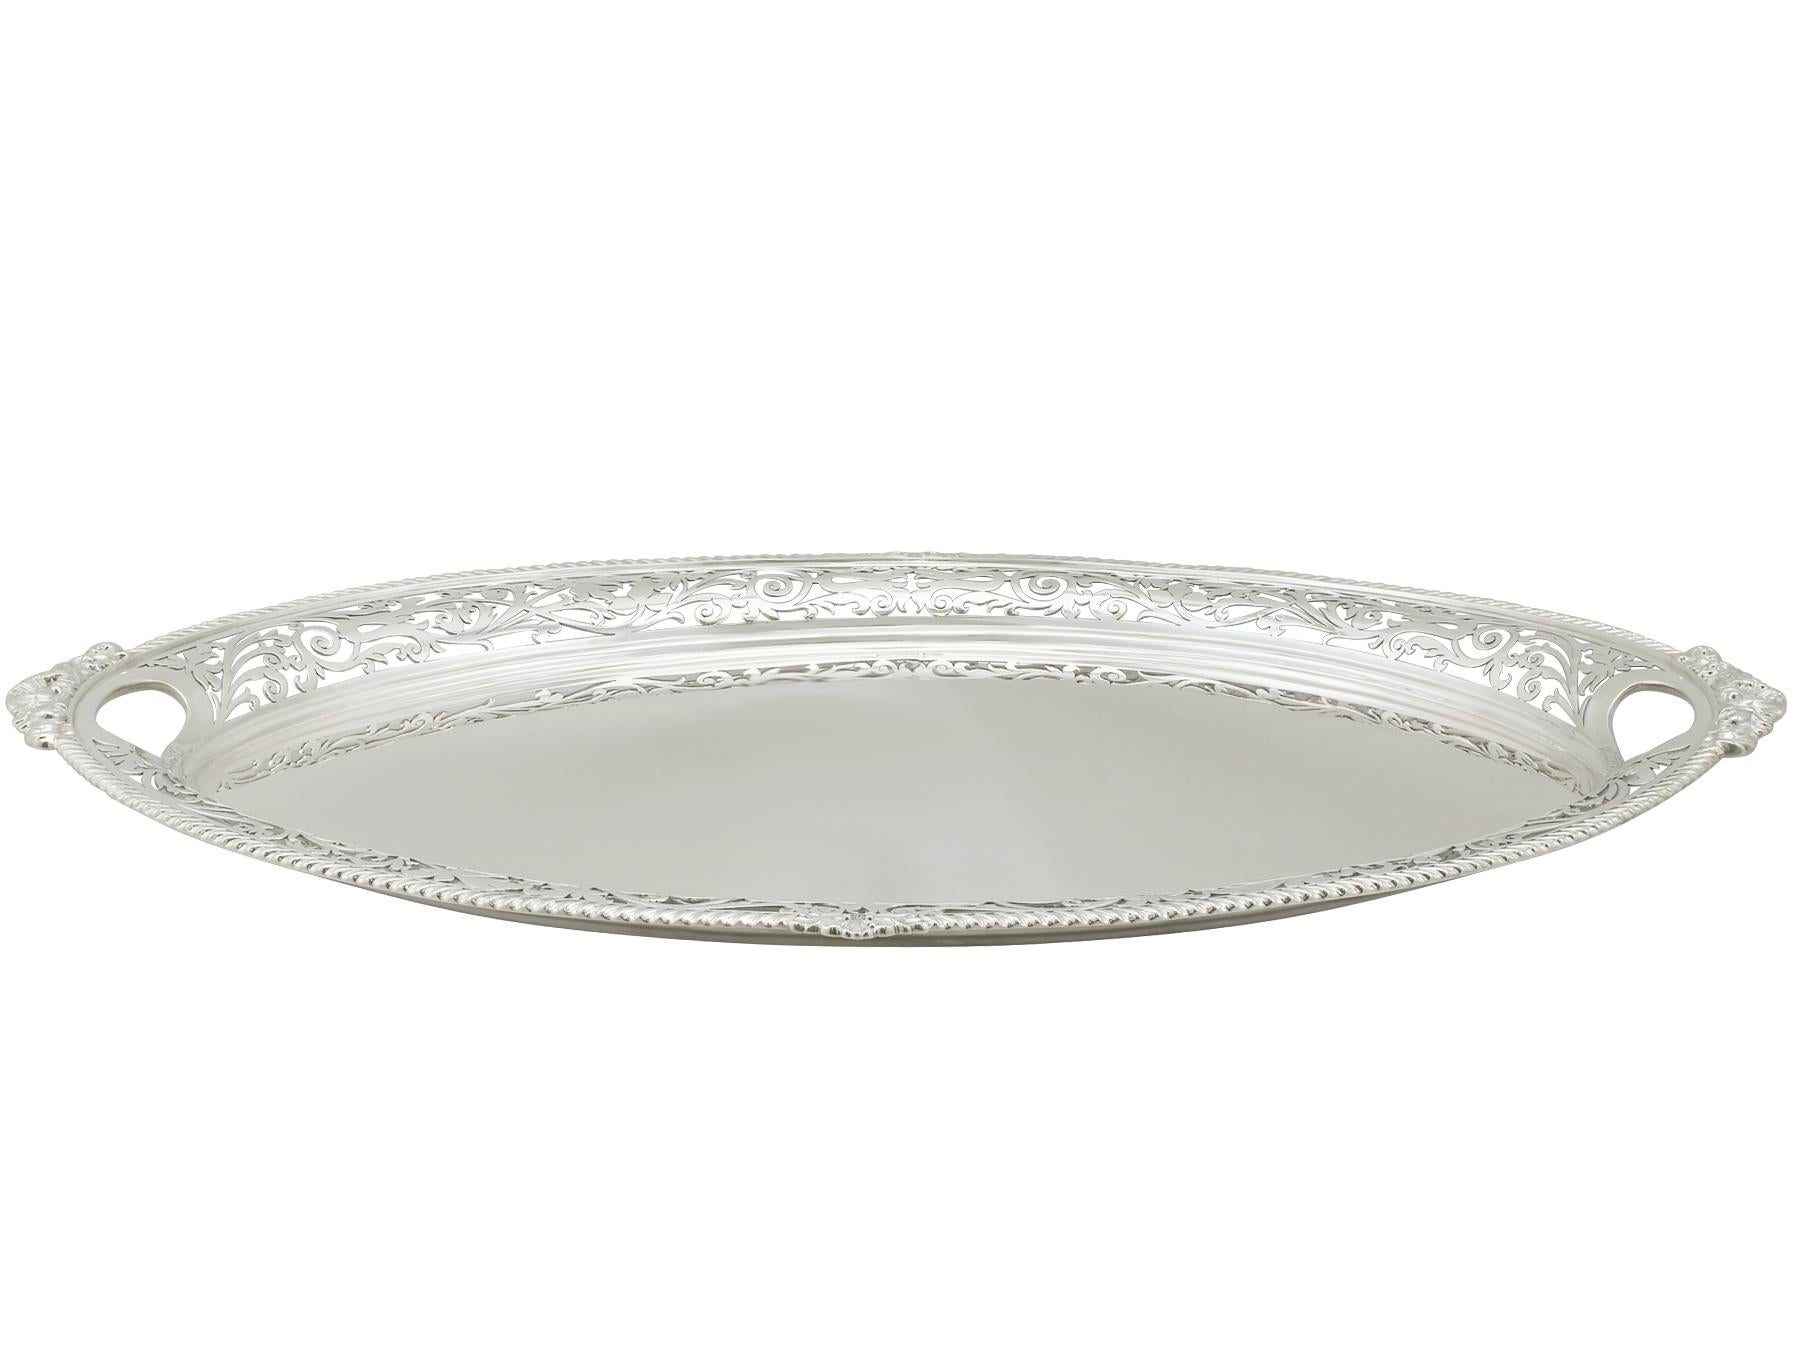 A fine, large and impressive antique Edwardian English sterling silver two-handled tea tray; an addition to our silverware collection.

This fine antique Edwardian sterling silver tea tray has an oval navette shaped form.

The surface of this